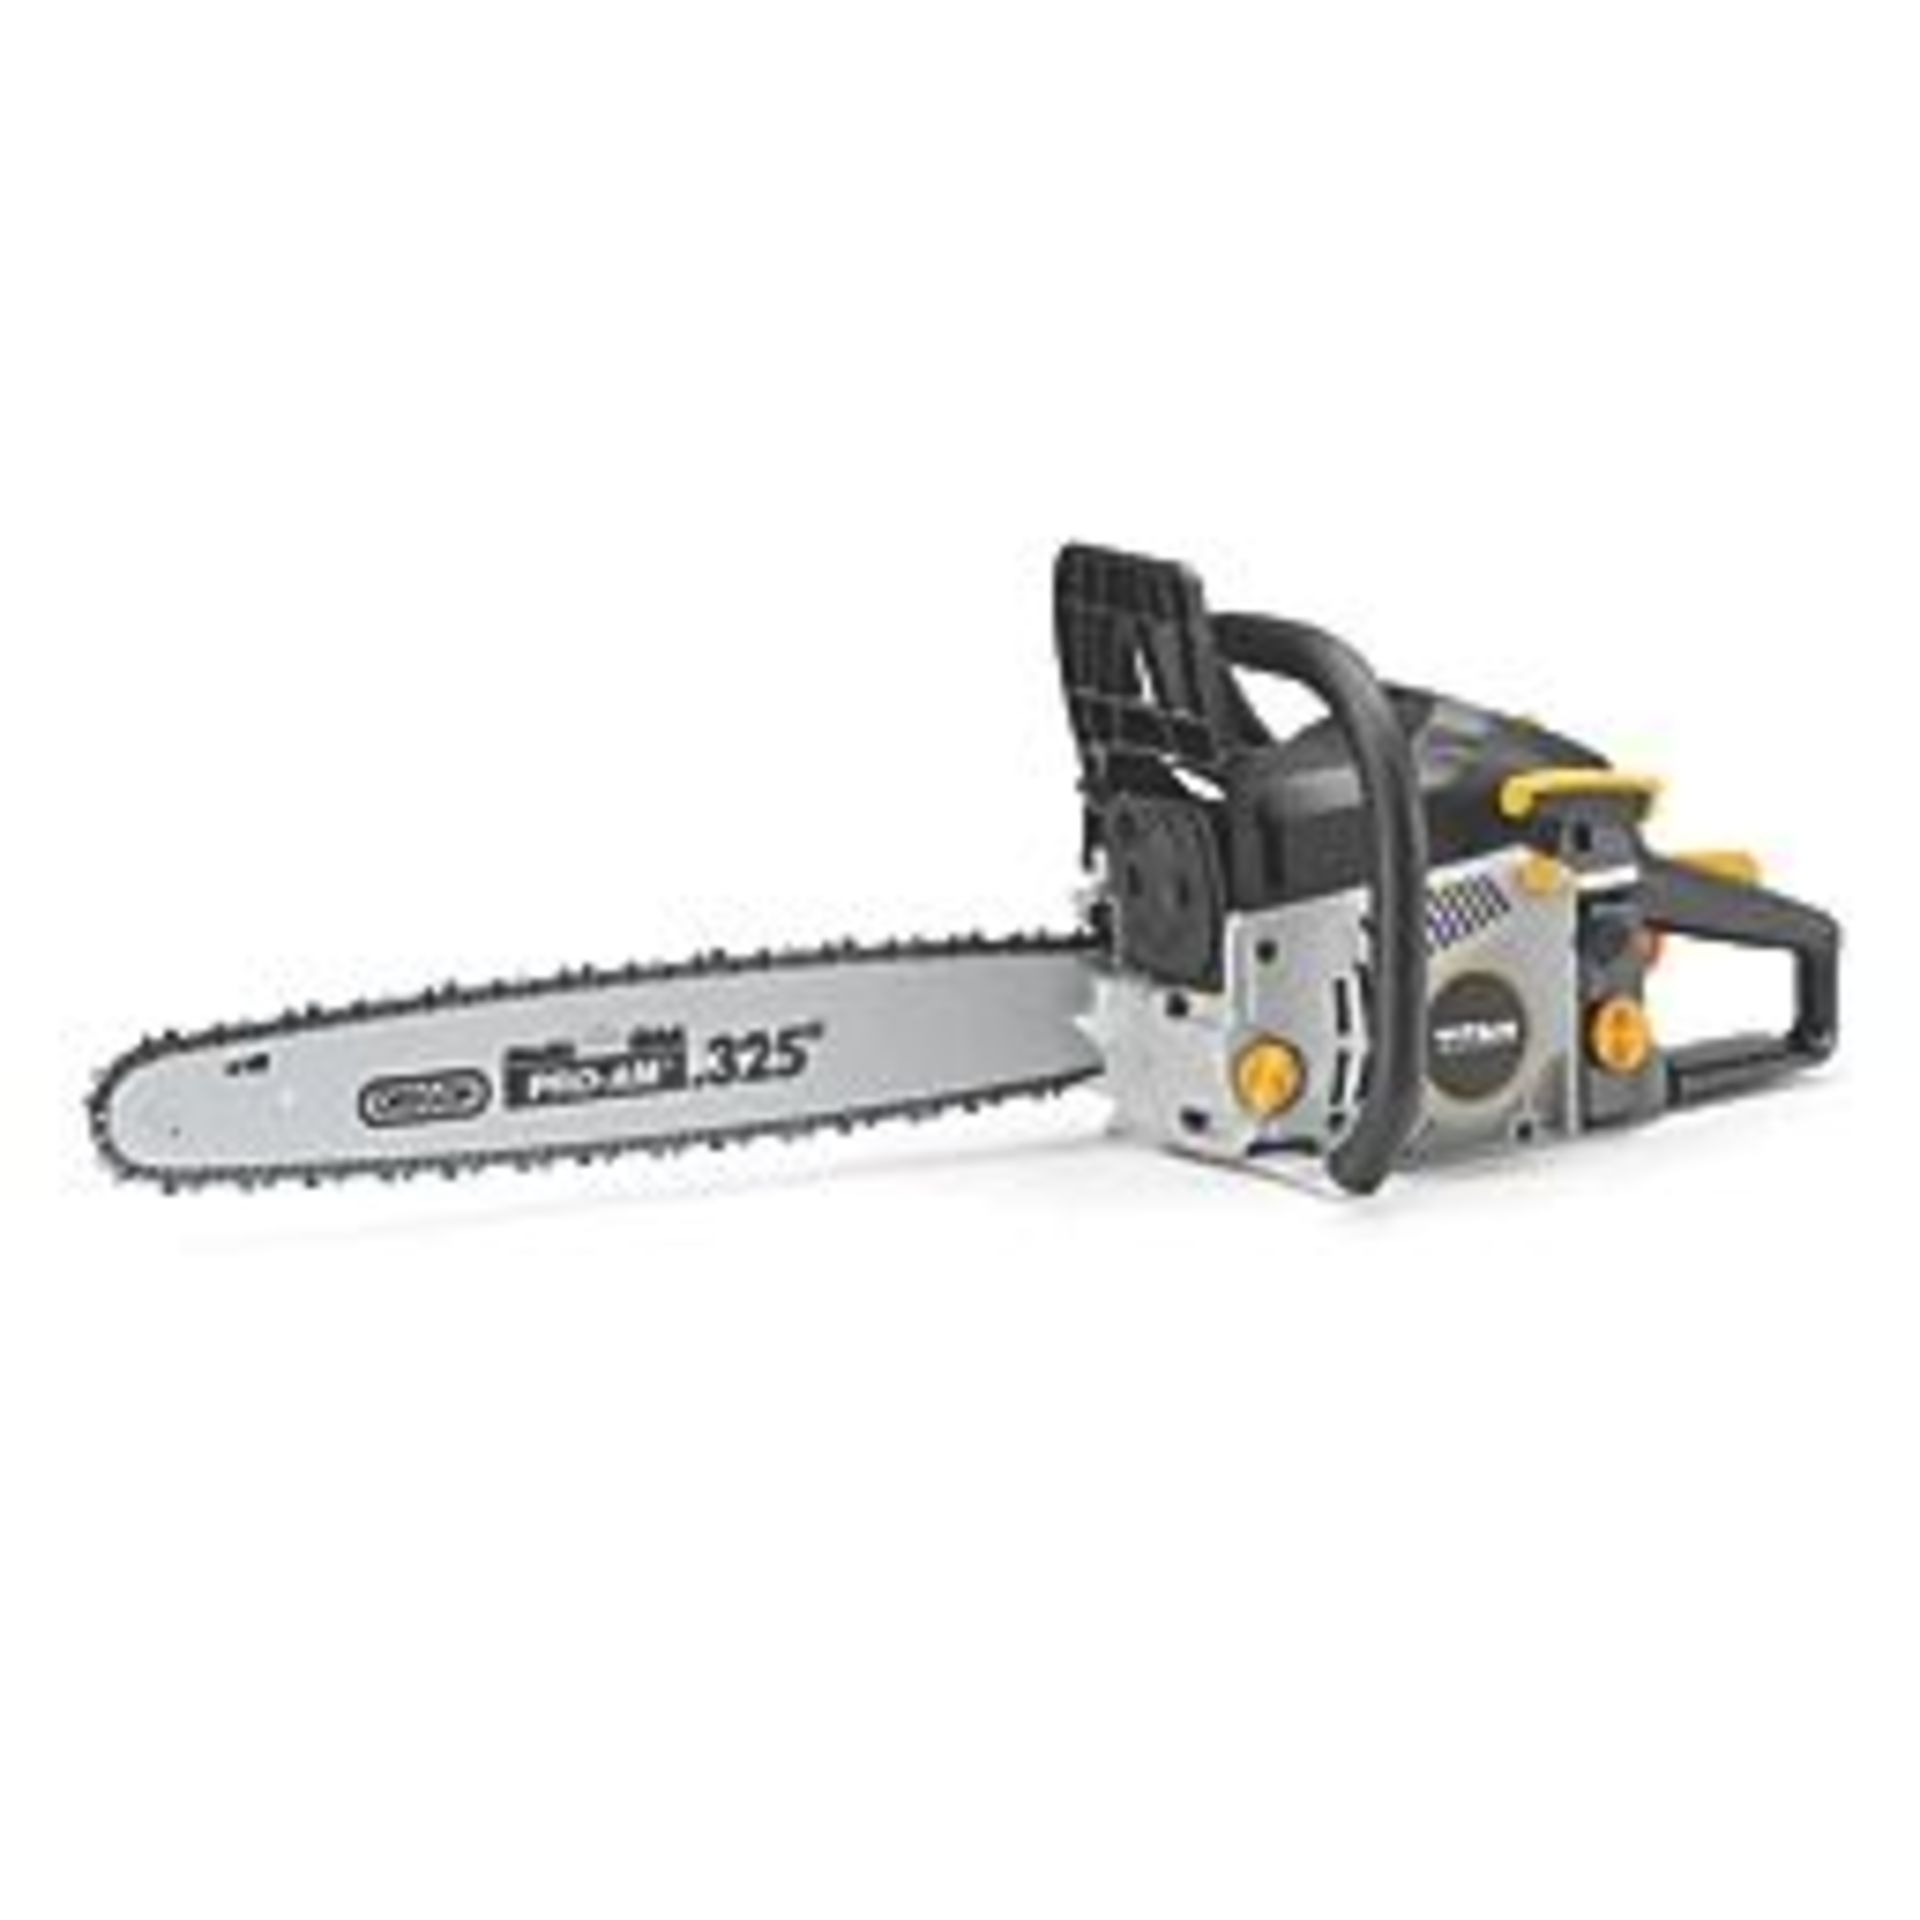 TITAN TTCSP49 50CM 49.3CC CHAINSAW . - S2. Powerful chainsaw with Easy-Start technology, reducing